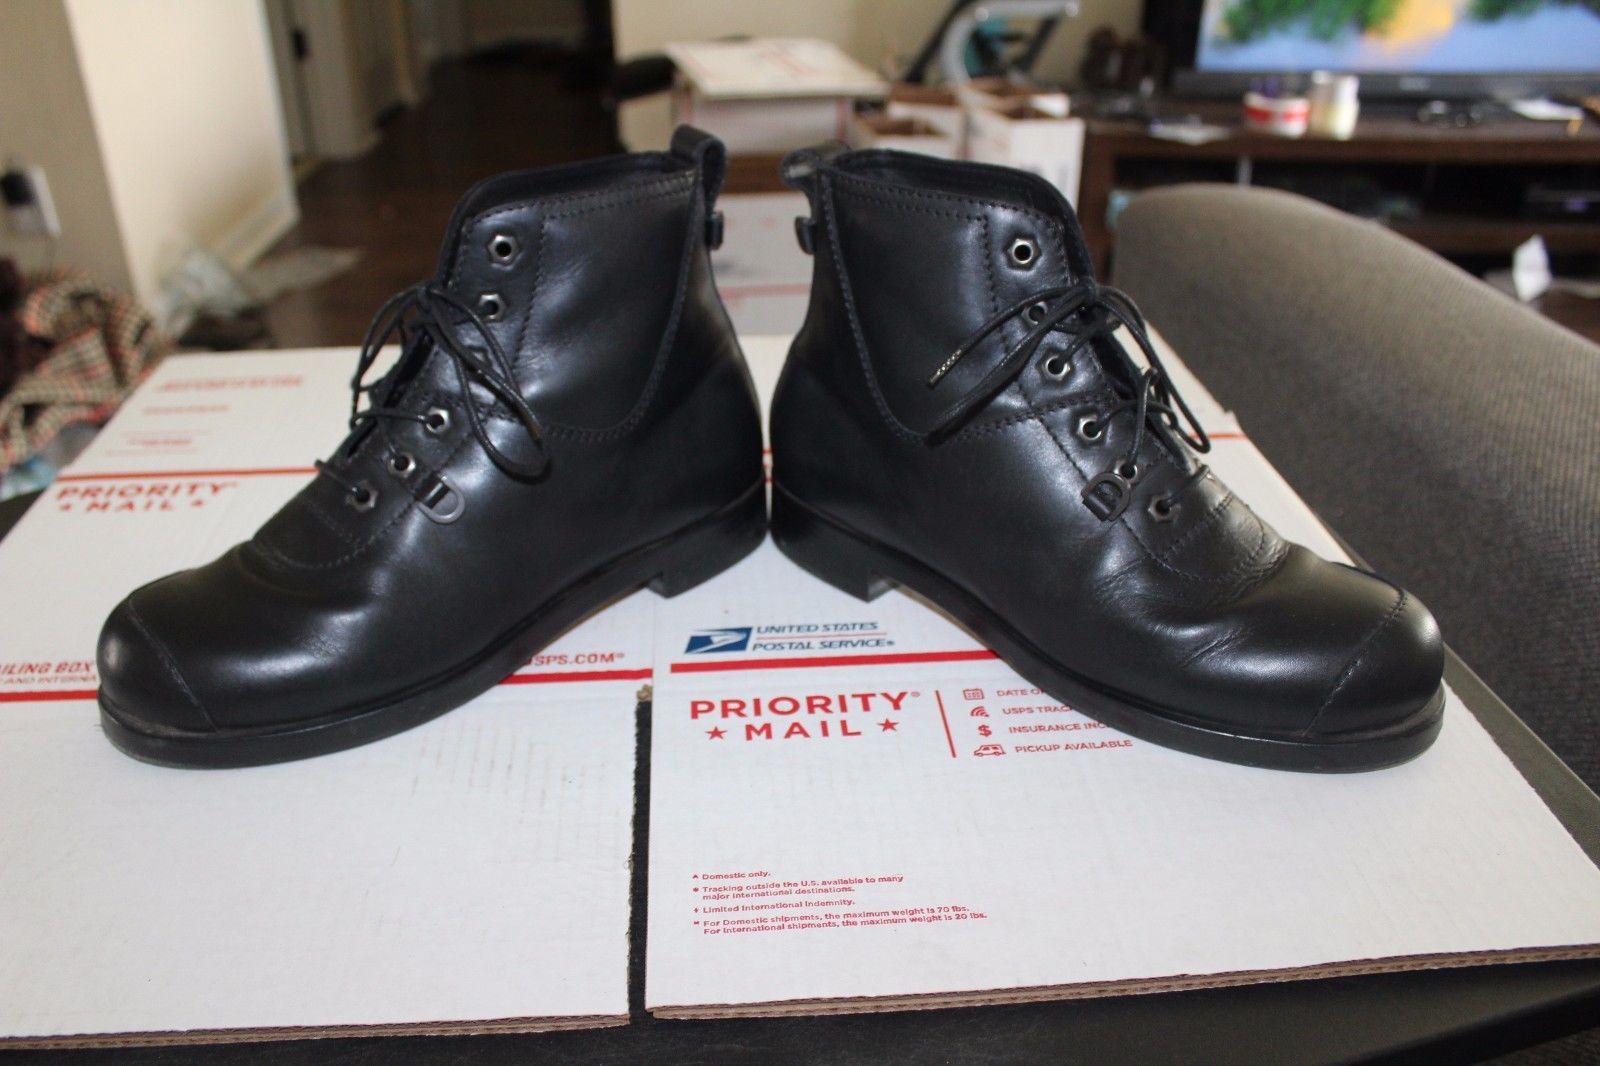 Helmut Lang HELMUT LANG ARCHIVE MADE IN INTALY COMBAT BOOT BLACK LEATHER SIZE 41 EU / 8 US Size US 8 / EU 41 - 10 Preview